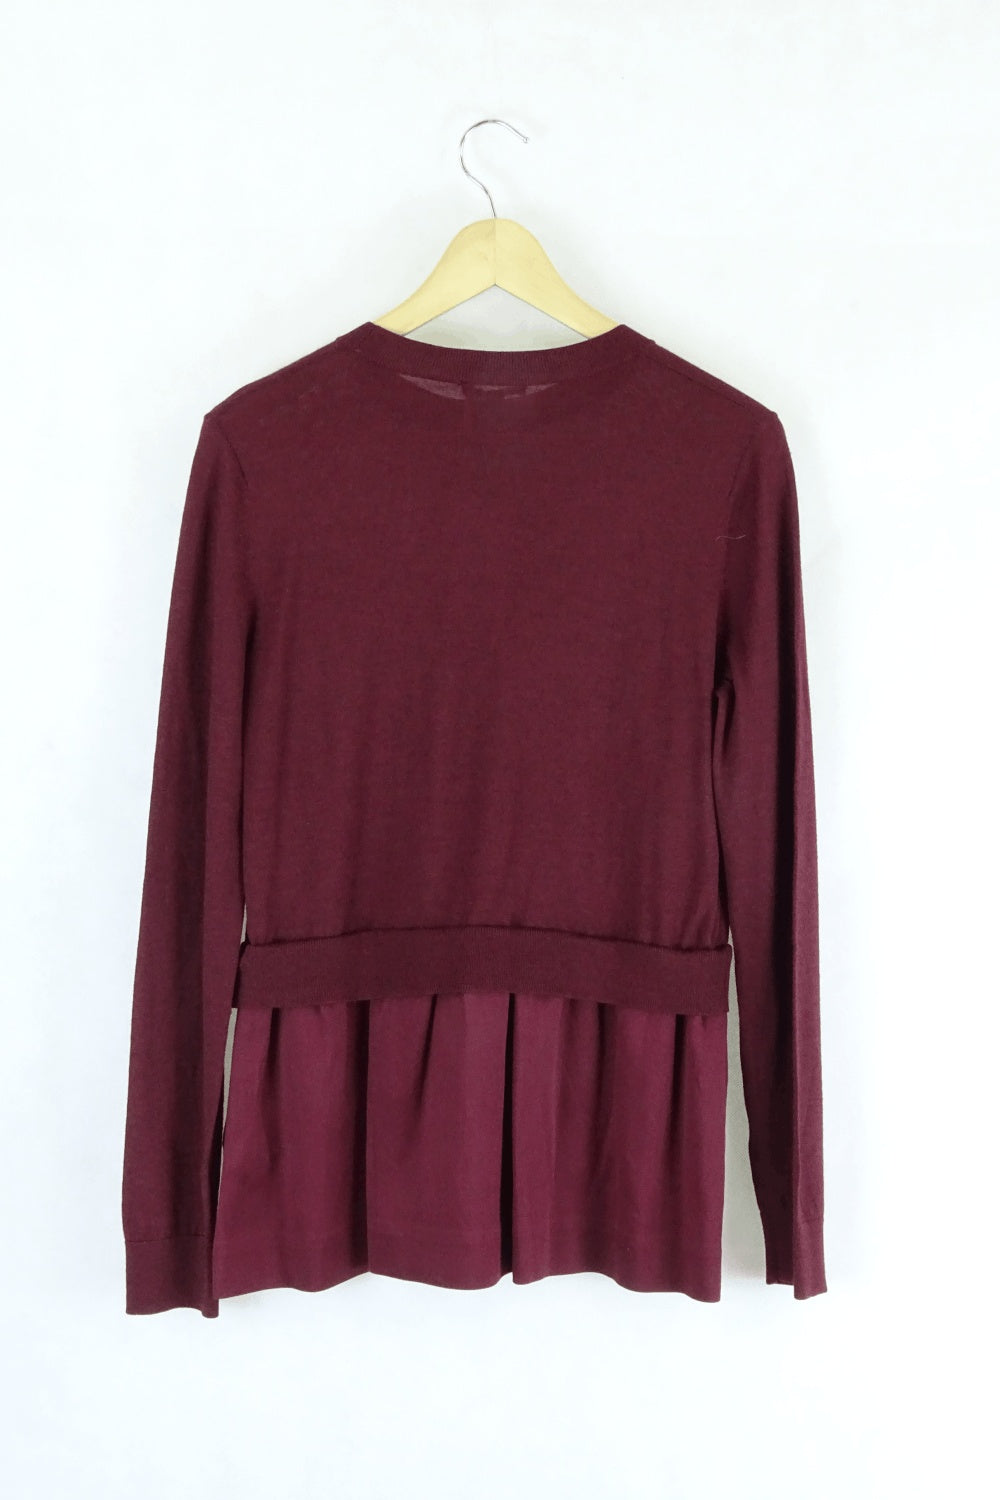 COS Burgundy Knit Top 10